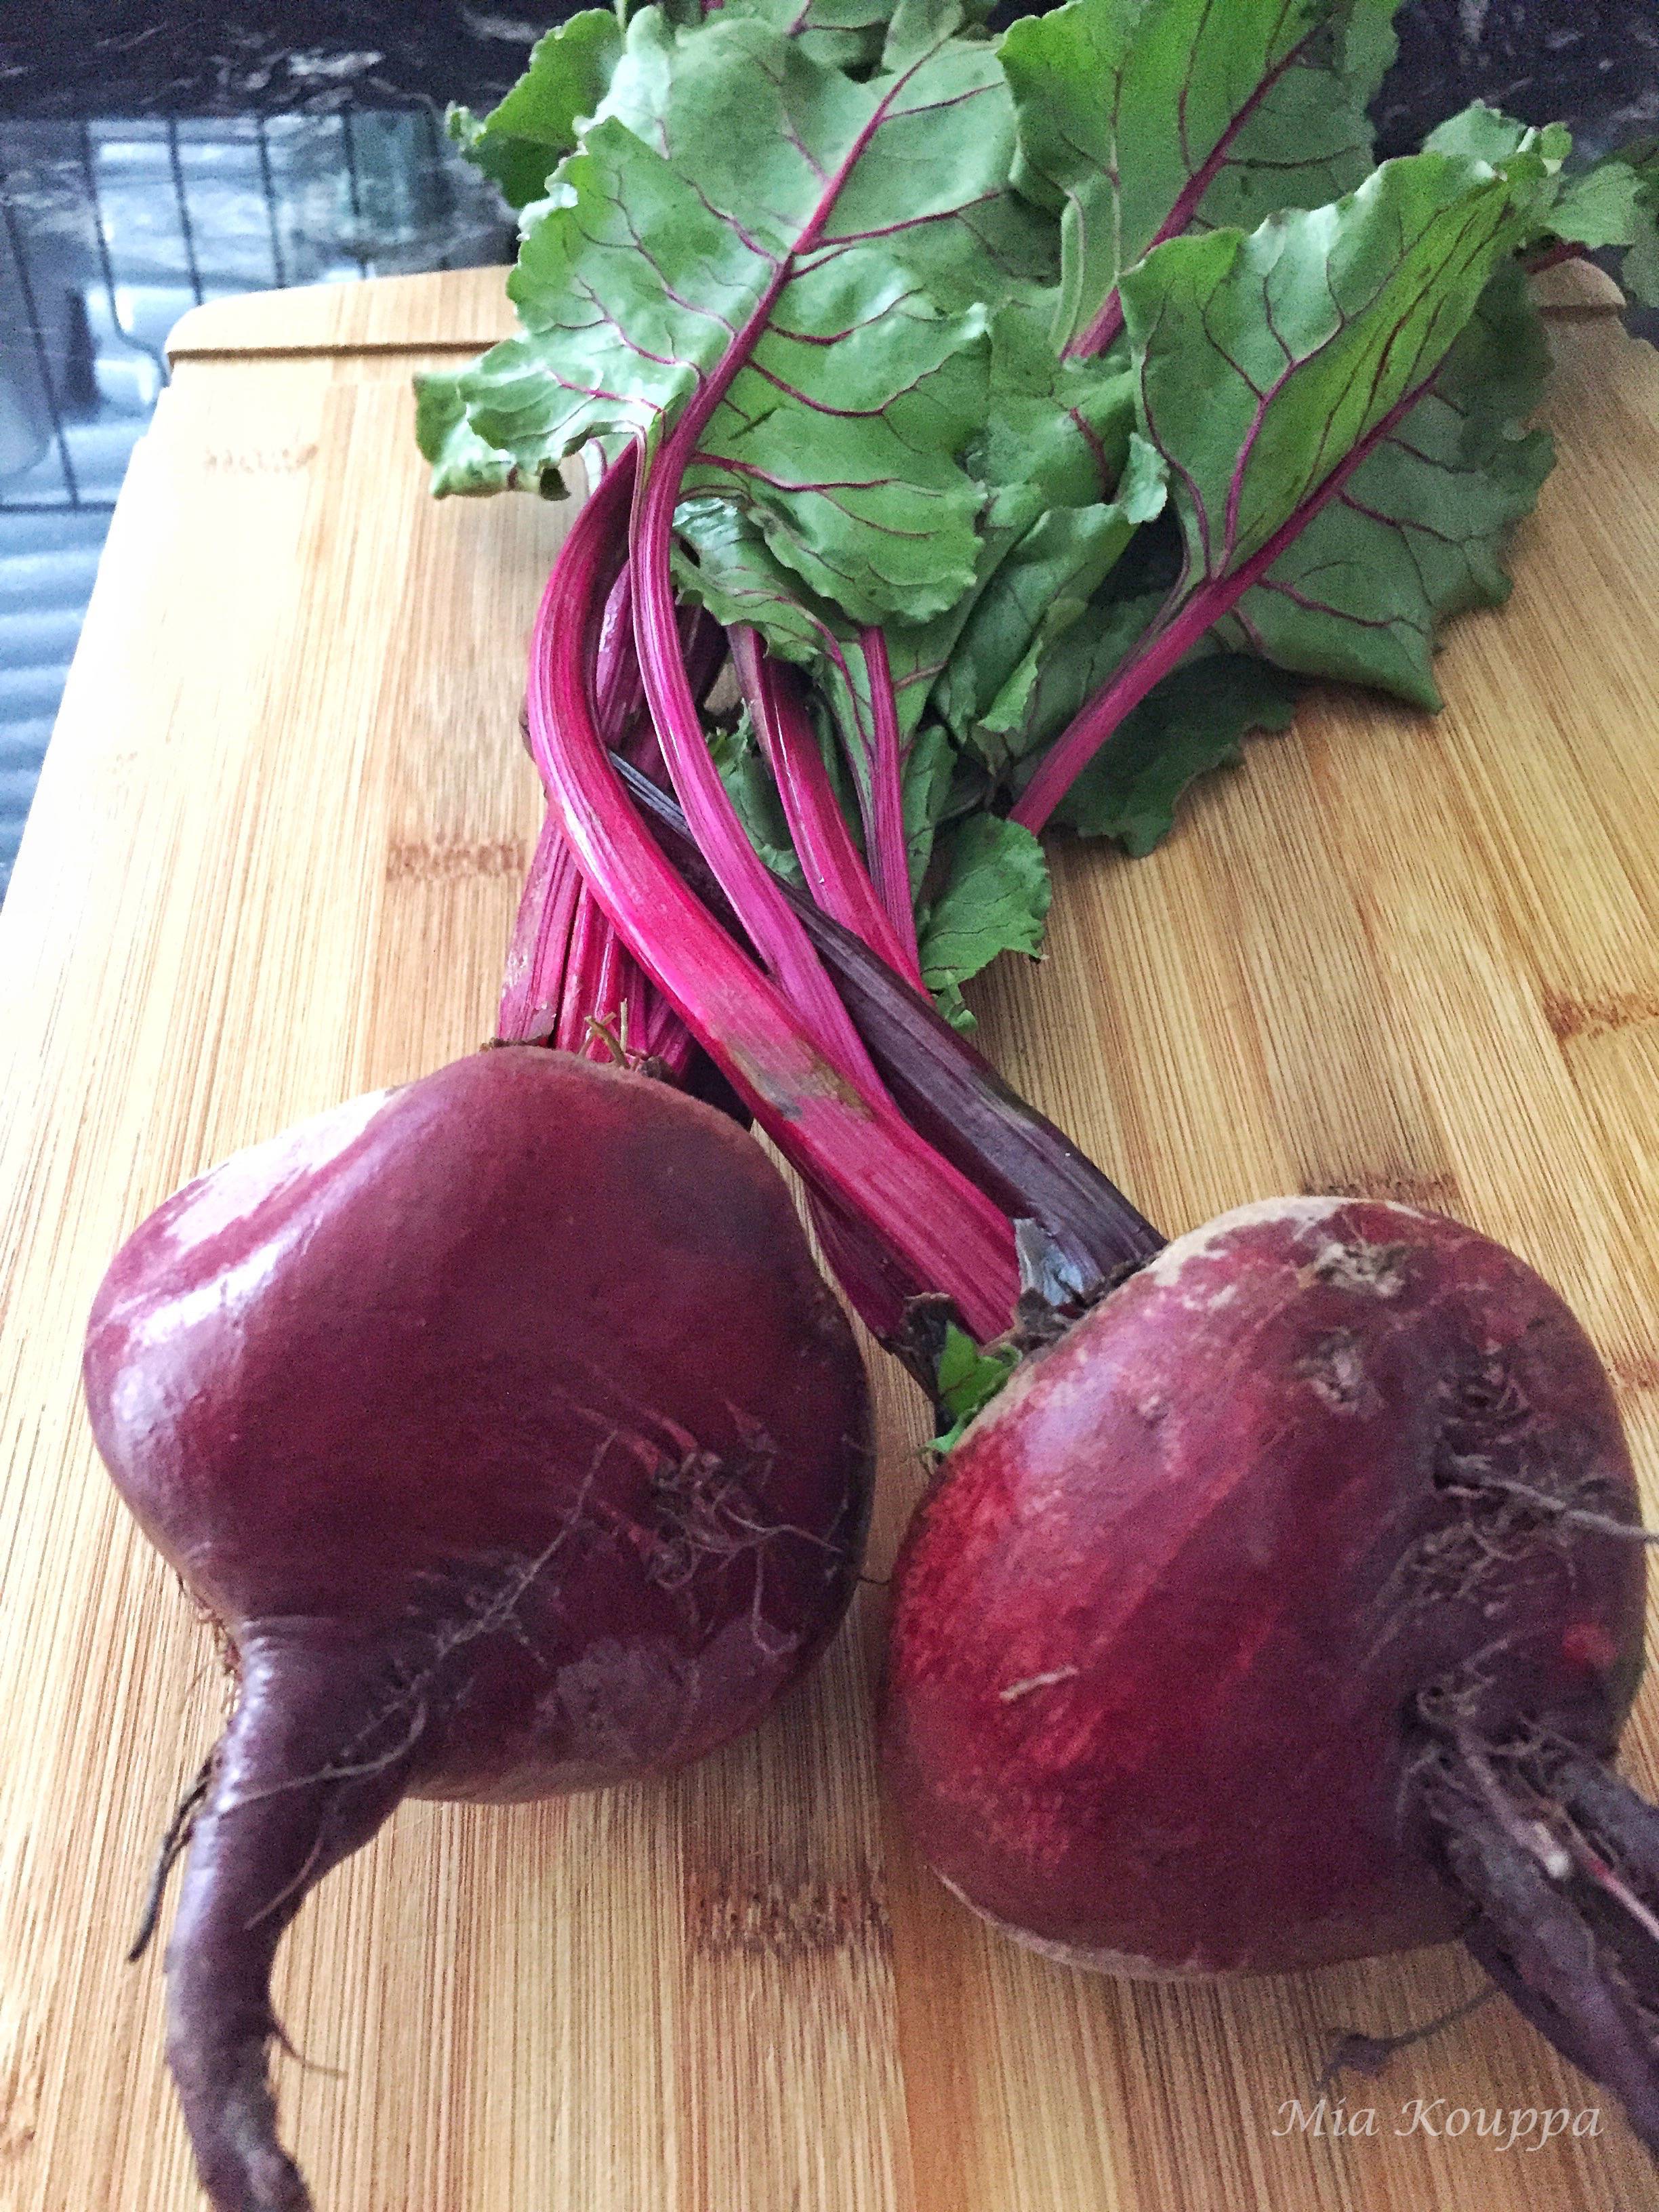 Beets and their greens